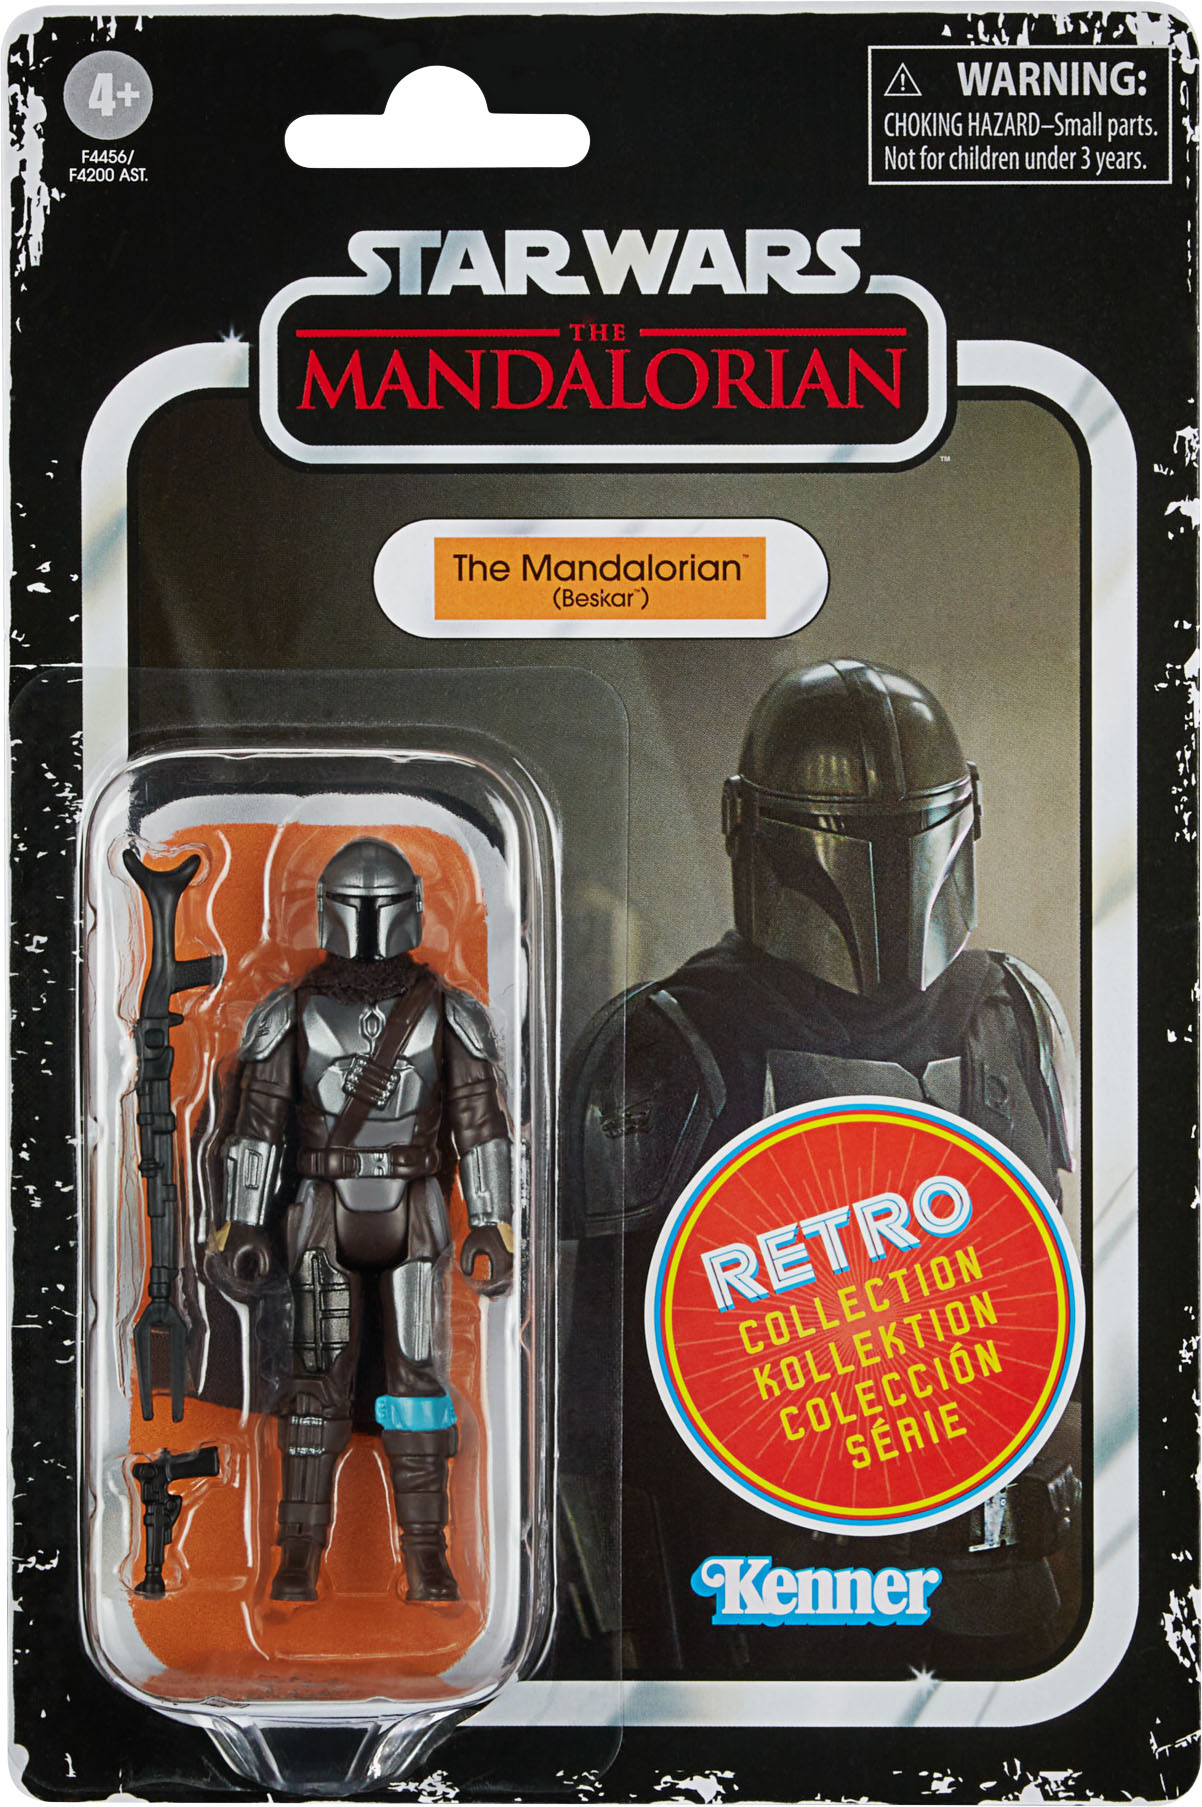 Star Wars The Mandalorian Vintage Collection Toy Figure Action Kenner 